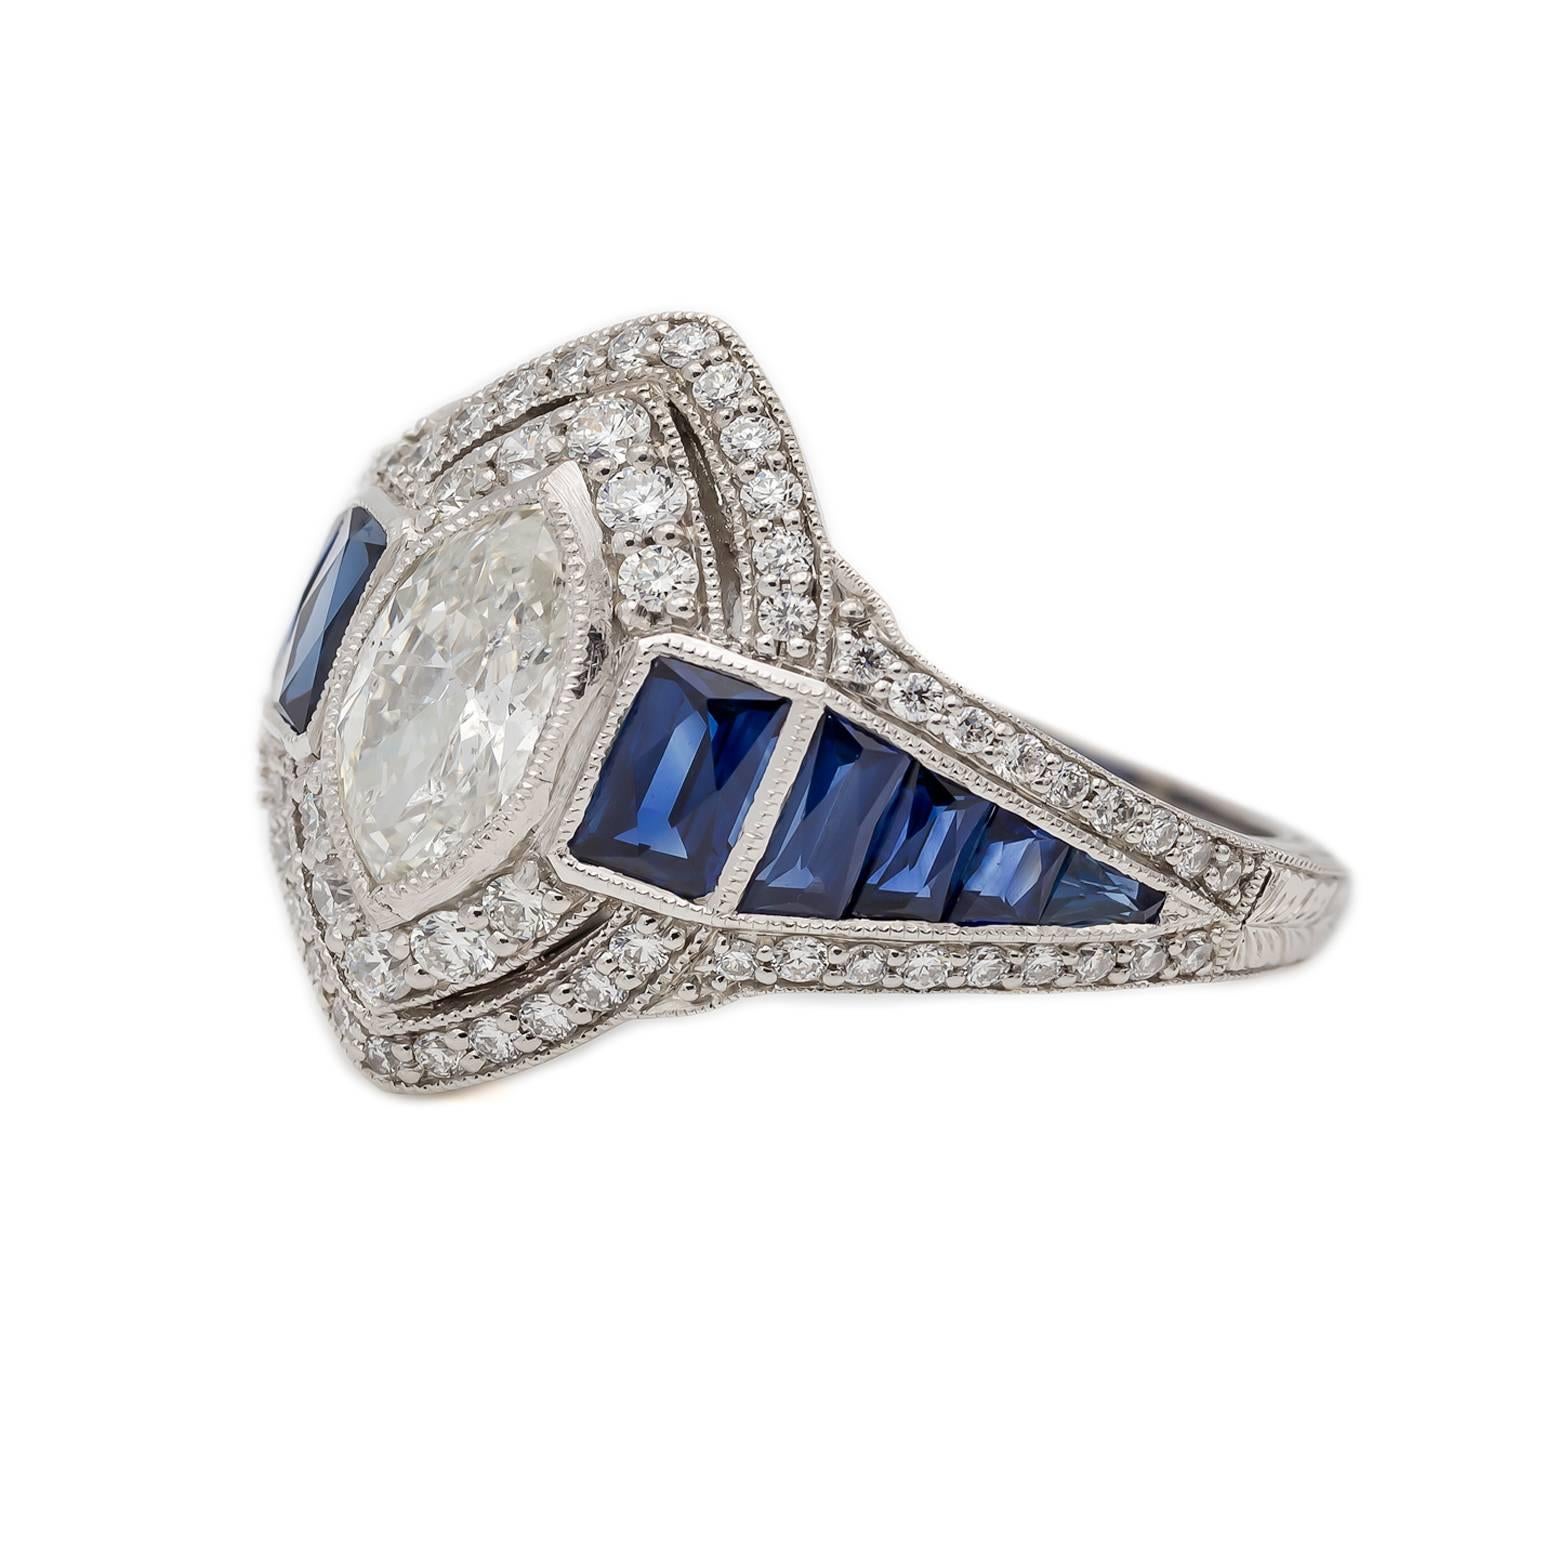 As if from a grandiose Gatsby party! 1.02 carats of a Marquise Diamond centerpiece with 0.54 carats total weight Round Accent Diamonds. 0.68 carats total weight of Baguette Sapphires to compliment the brilliant design- an absolute stunner! Set in